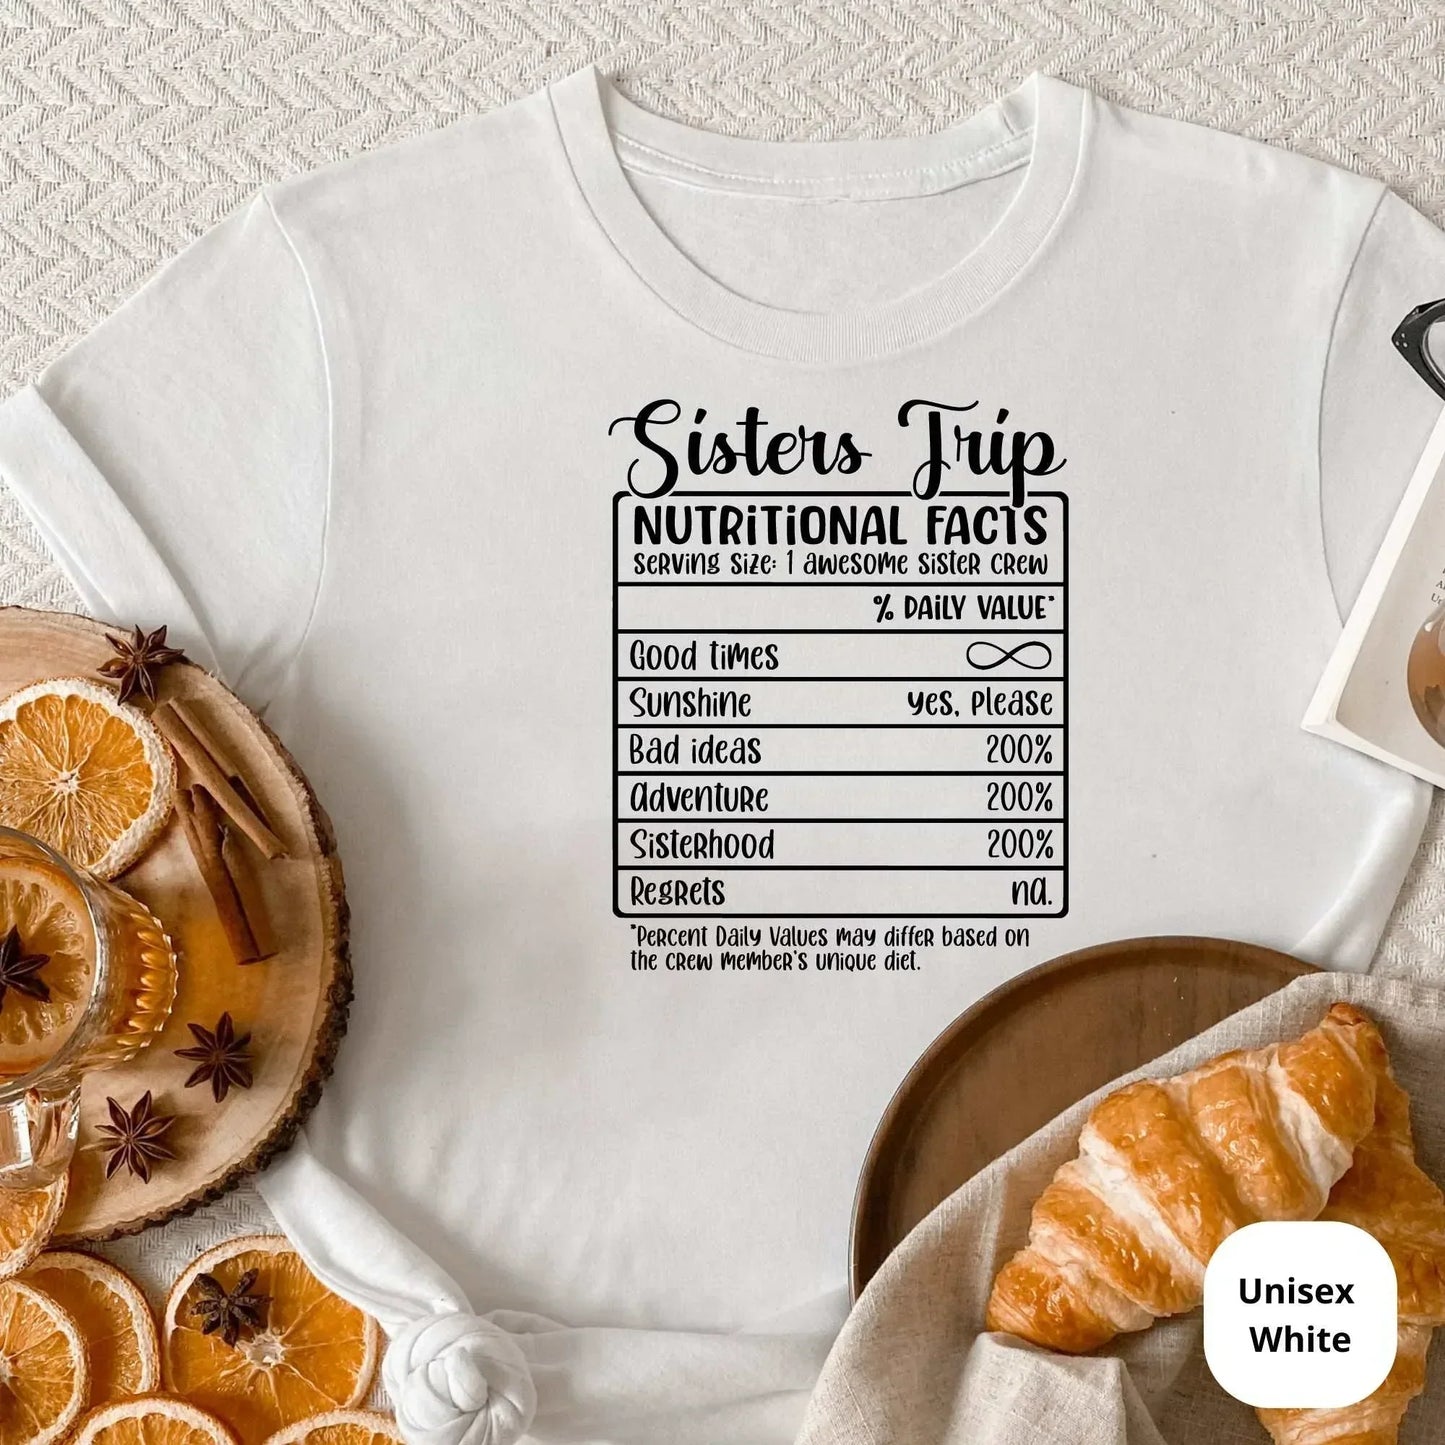 Girls Trip Shirts, Sisters Vacation, Best Friends Gifts, Matching Group Vacation Tees, Mother Daughter Trip, BFF Vacay, Besties Weekend HMDesignStudioUS